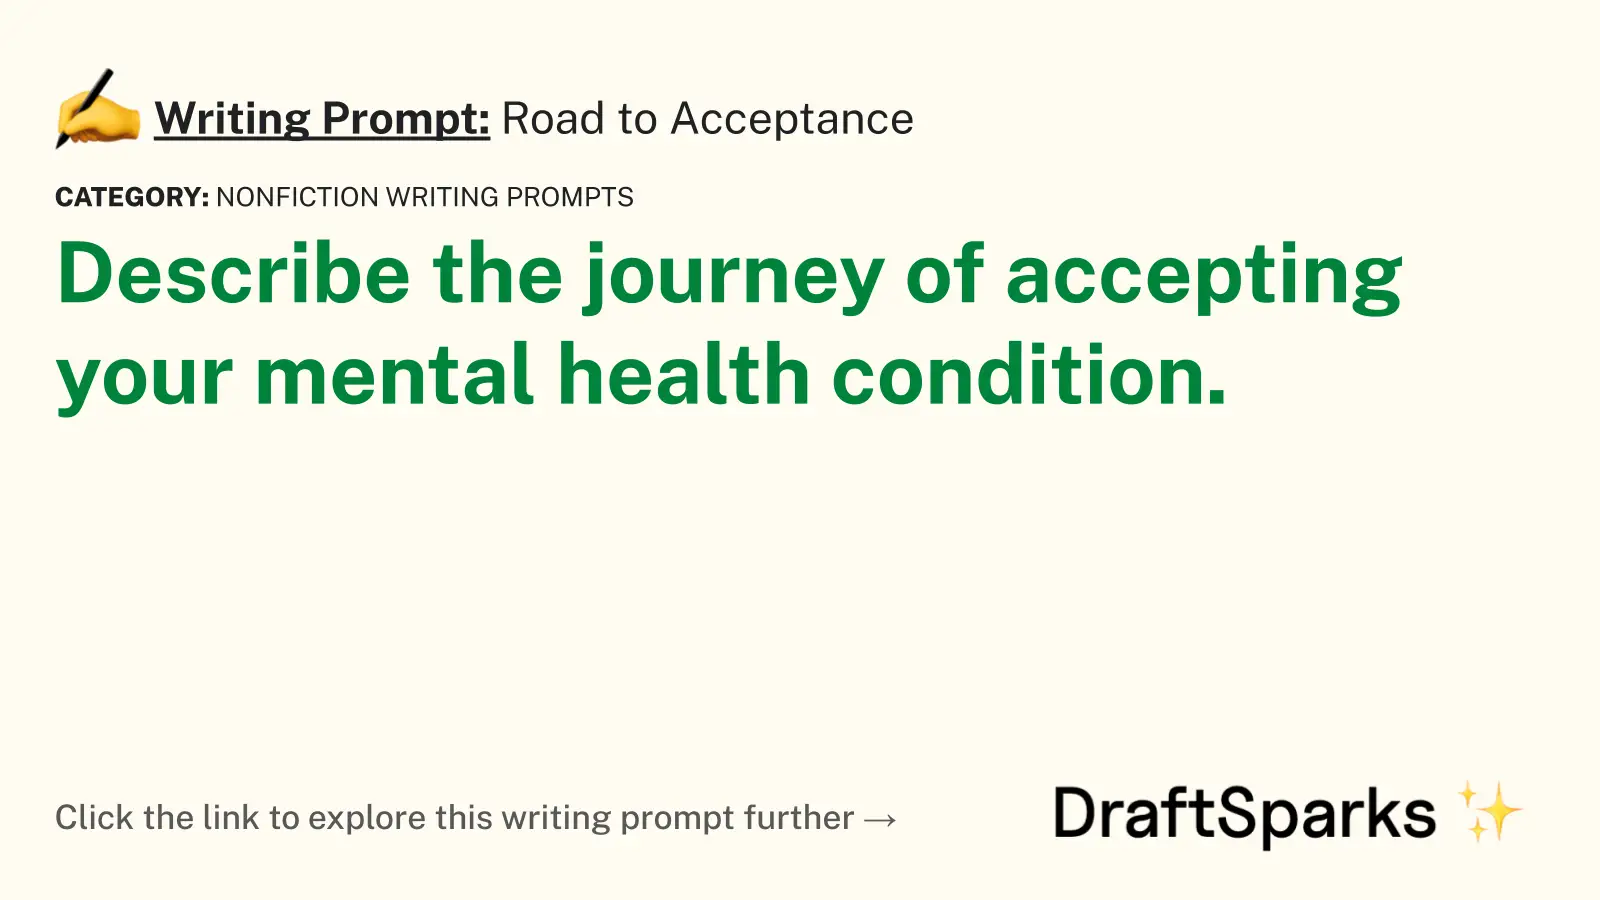 Road to Acceptance